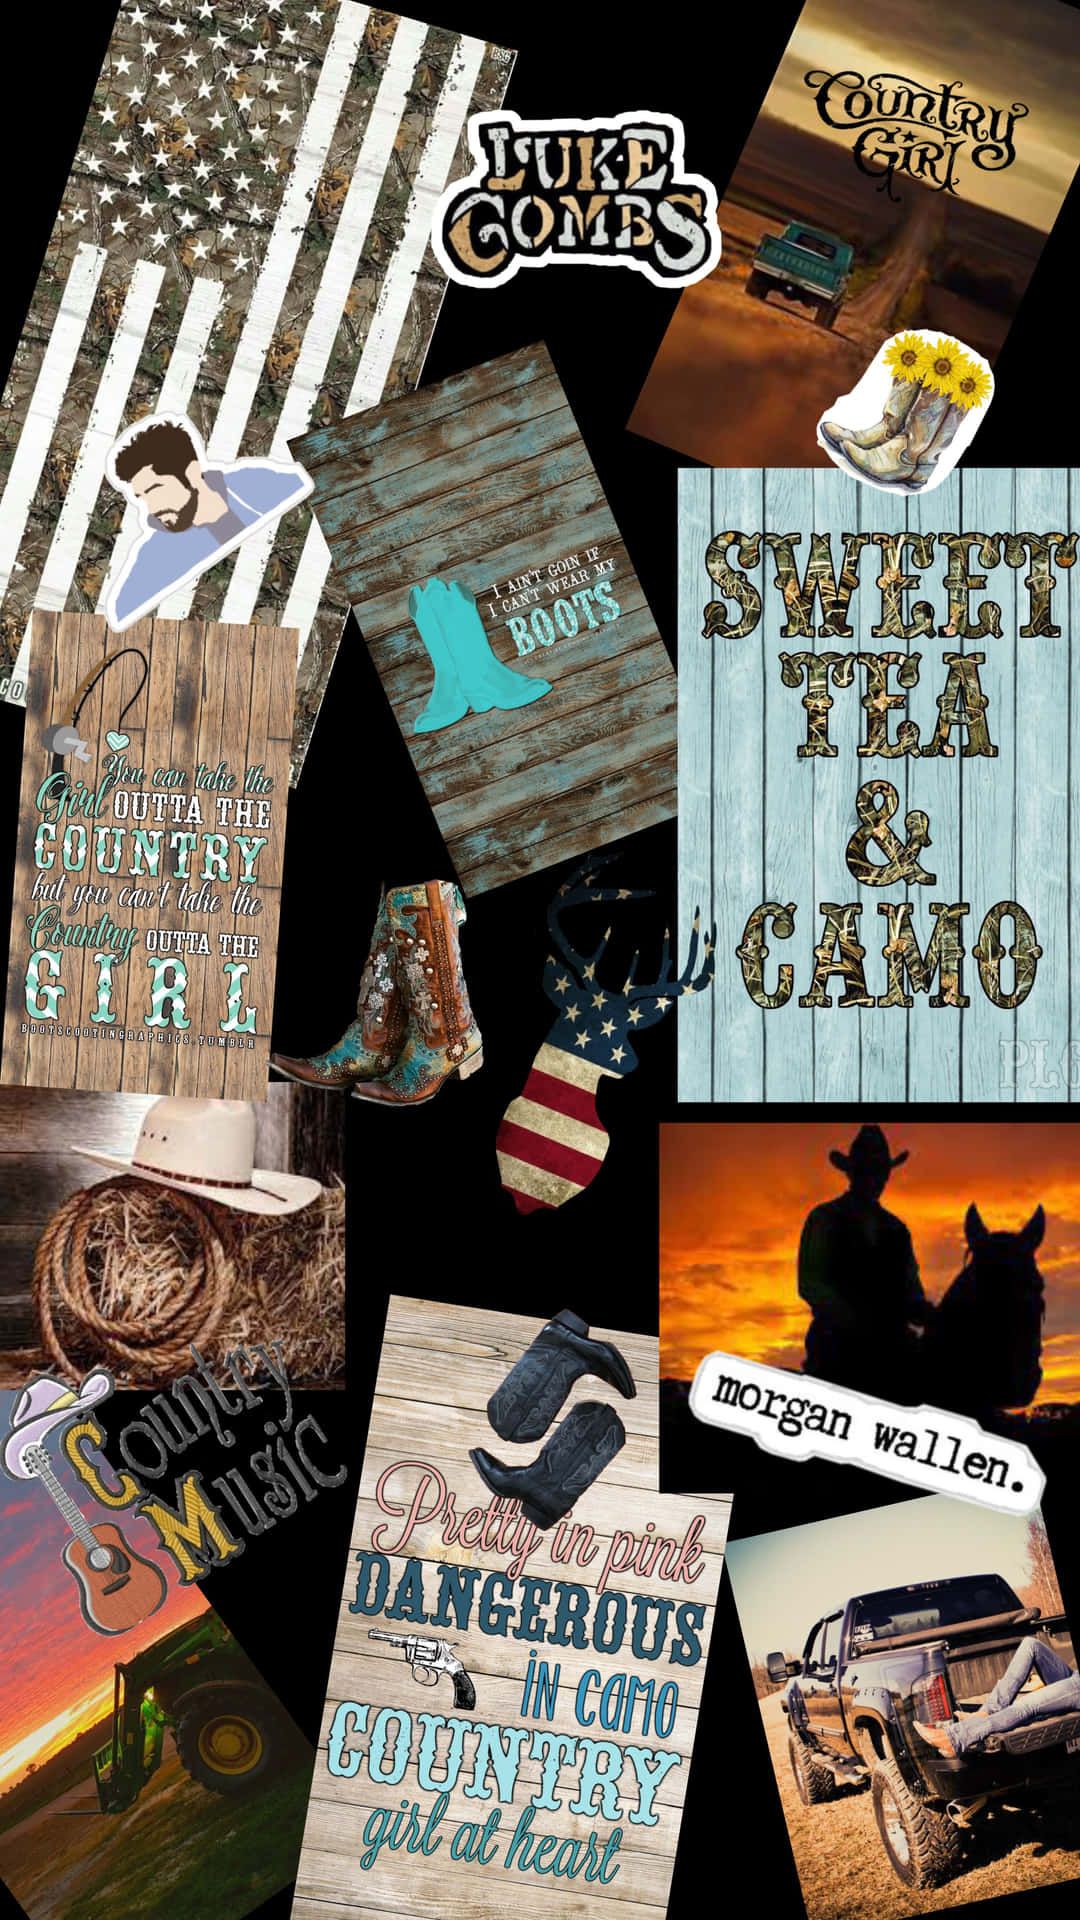 Cute Country Images And Musician Collage Wallpaper